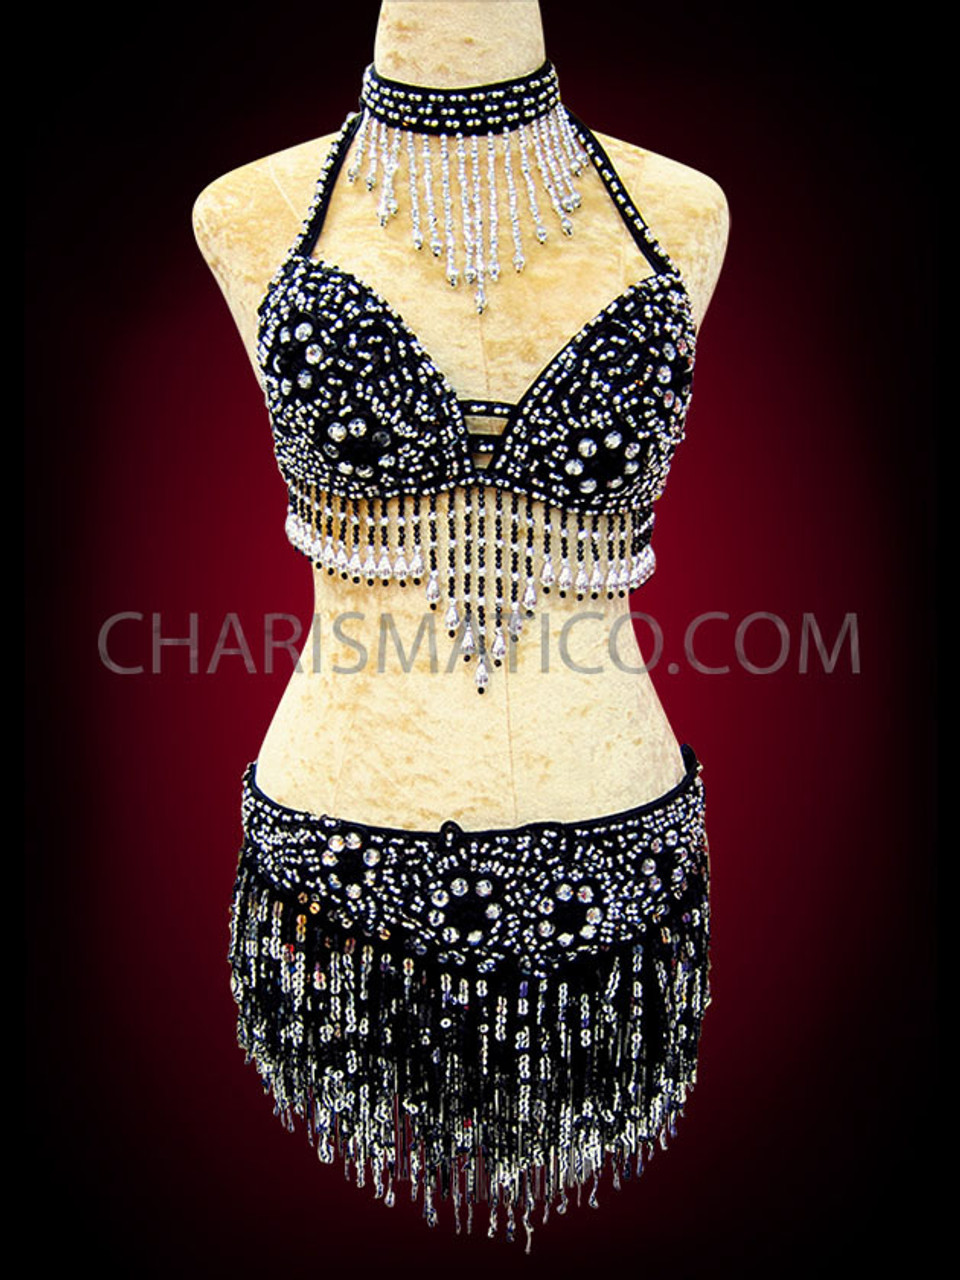 https://cdn11.bigcommerce.com/s-07991/images/stencil/1280x1280/products/1446/55714/Silver_Beaded_Black_Dance_Bra_And_Skirt_With_Sequin_Fringe_DS1185__17838.1600677784.jpg?c=2